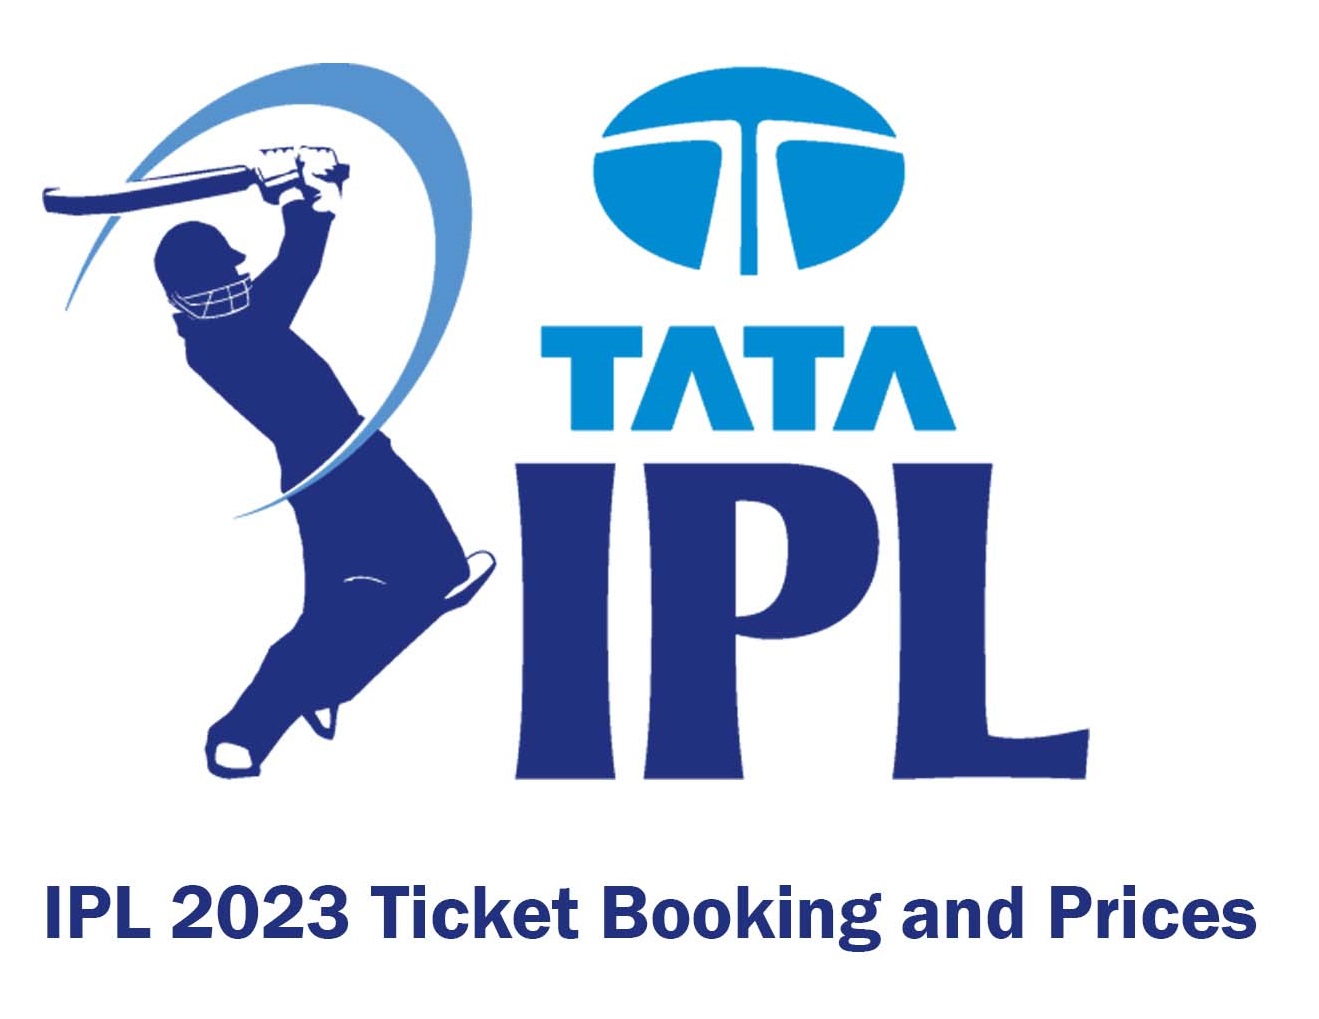 IPL 2023 Tickets Booking and Prices